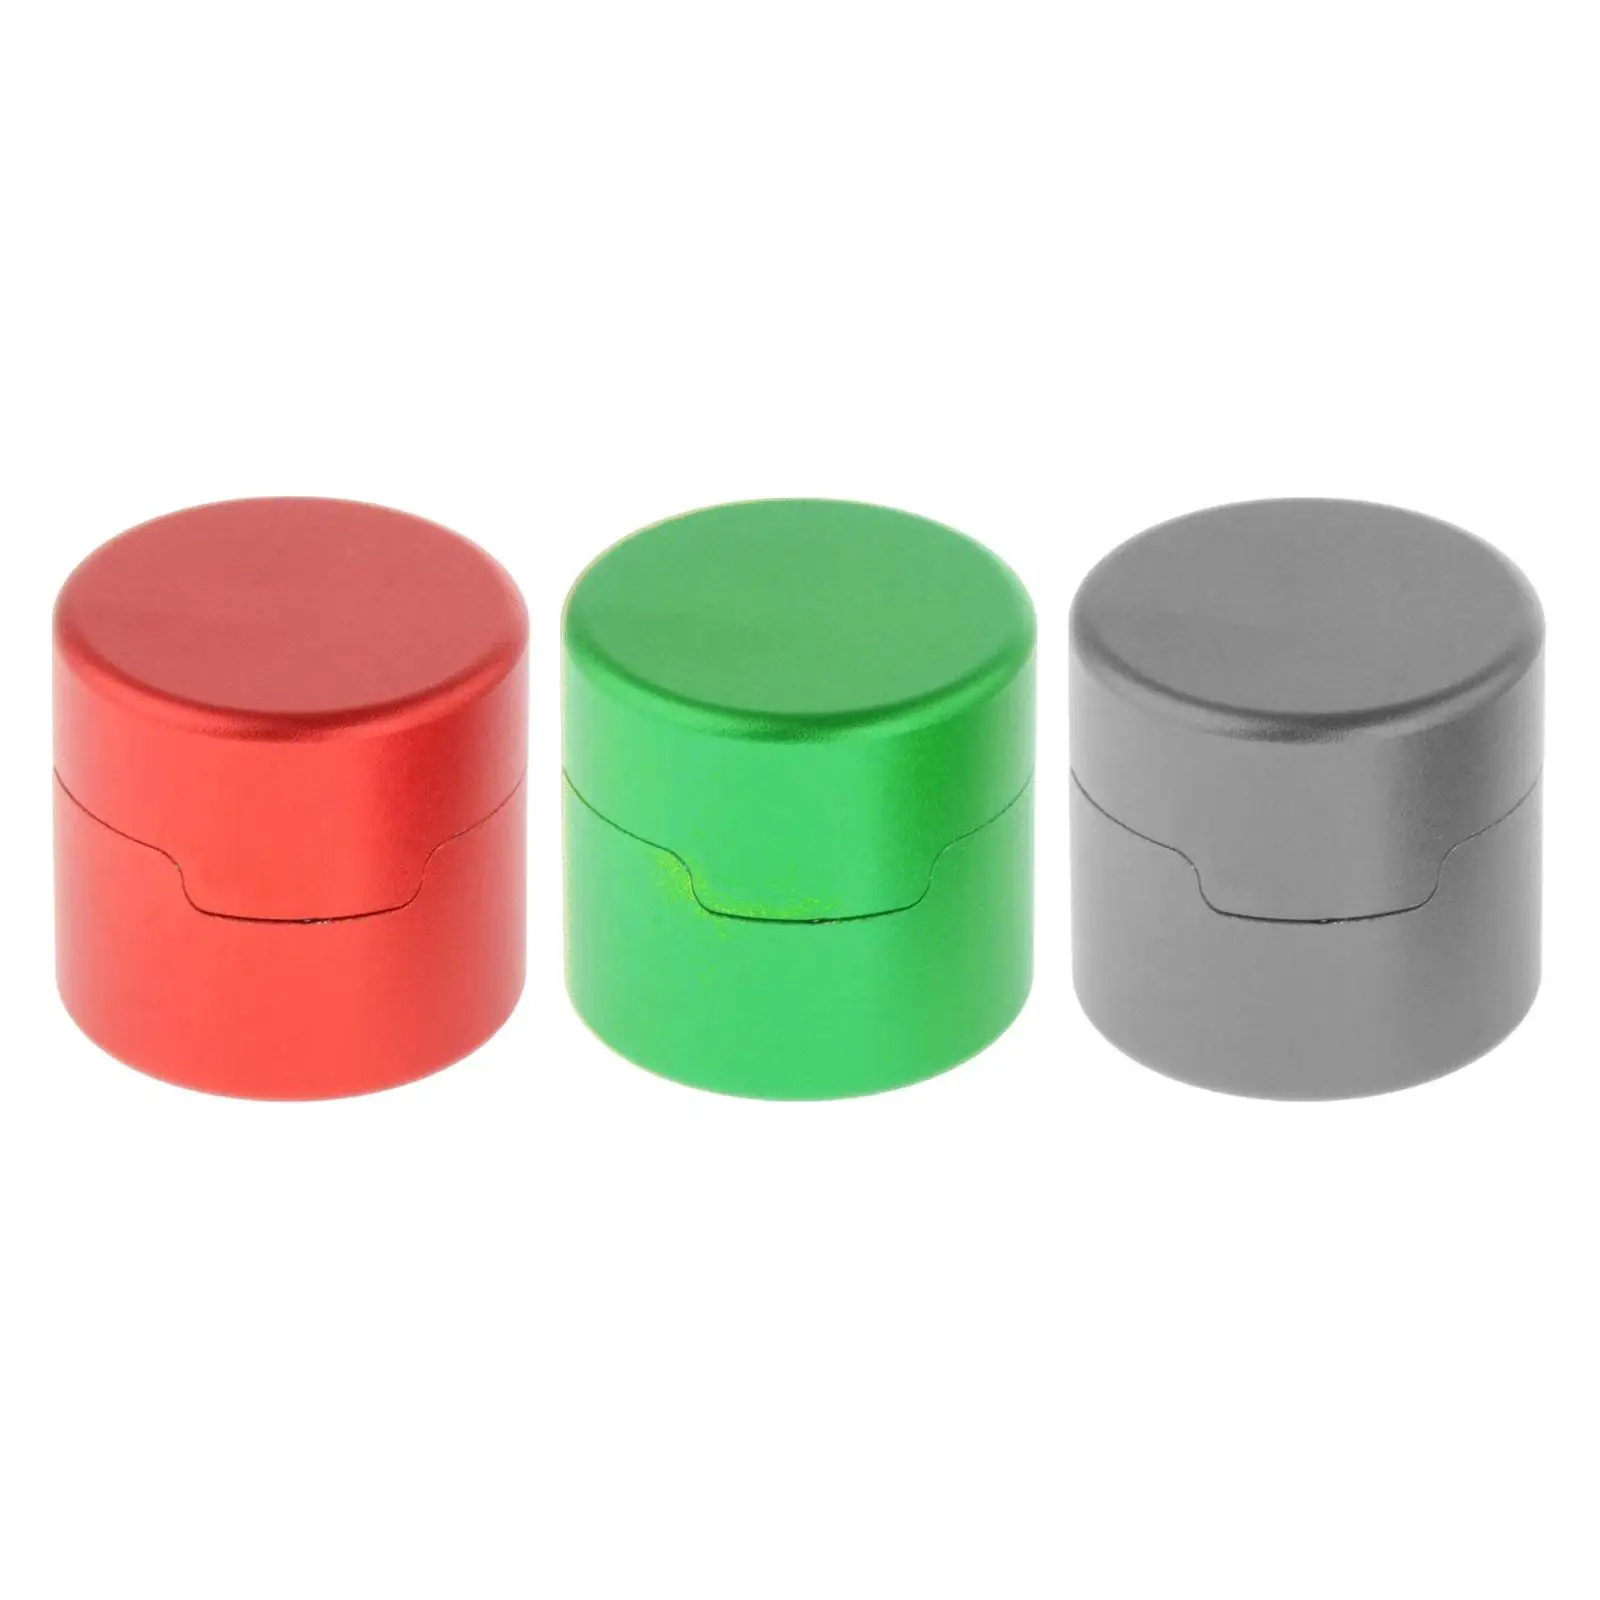 Pool Cue Chalk Holder Easy to Carry Container Round Shaped Cup Box Lightweight